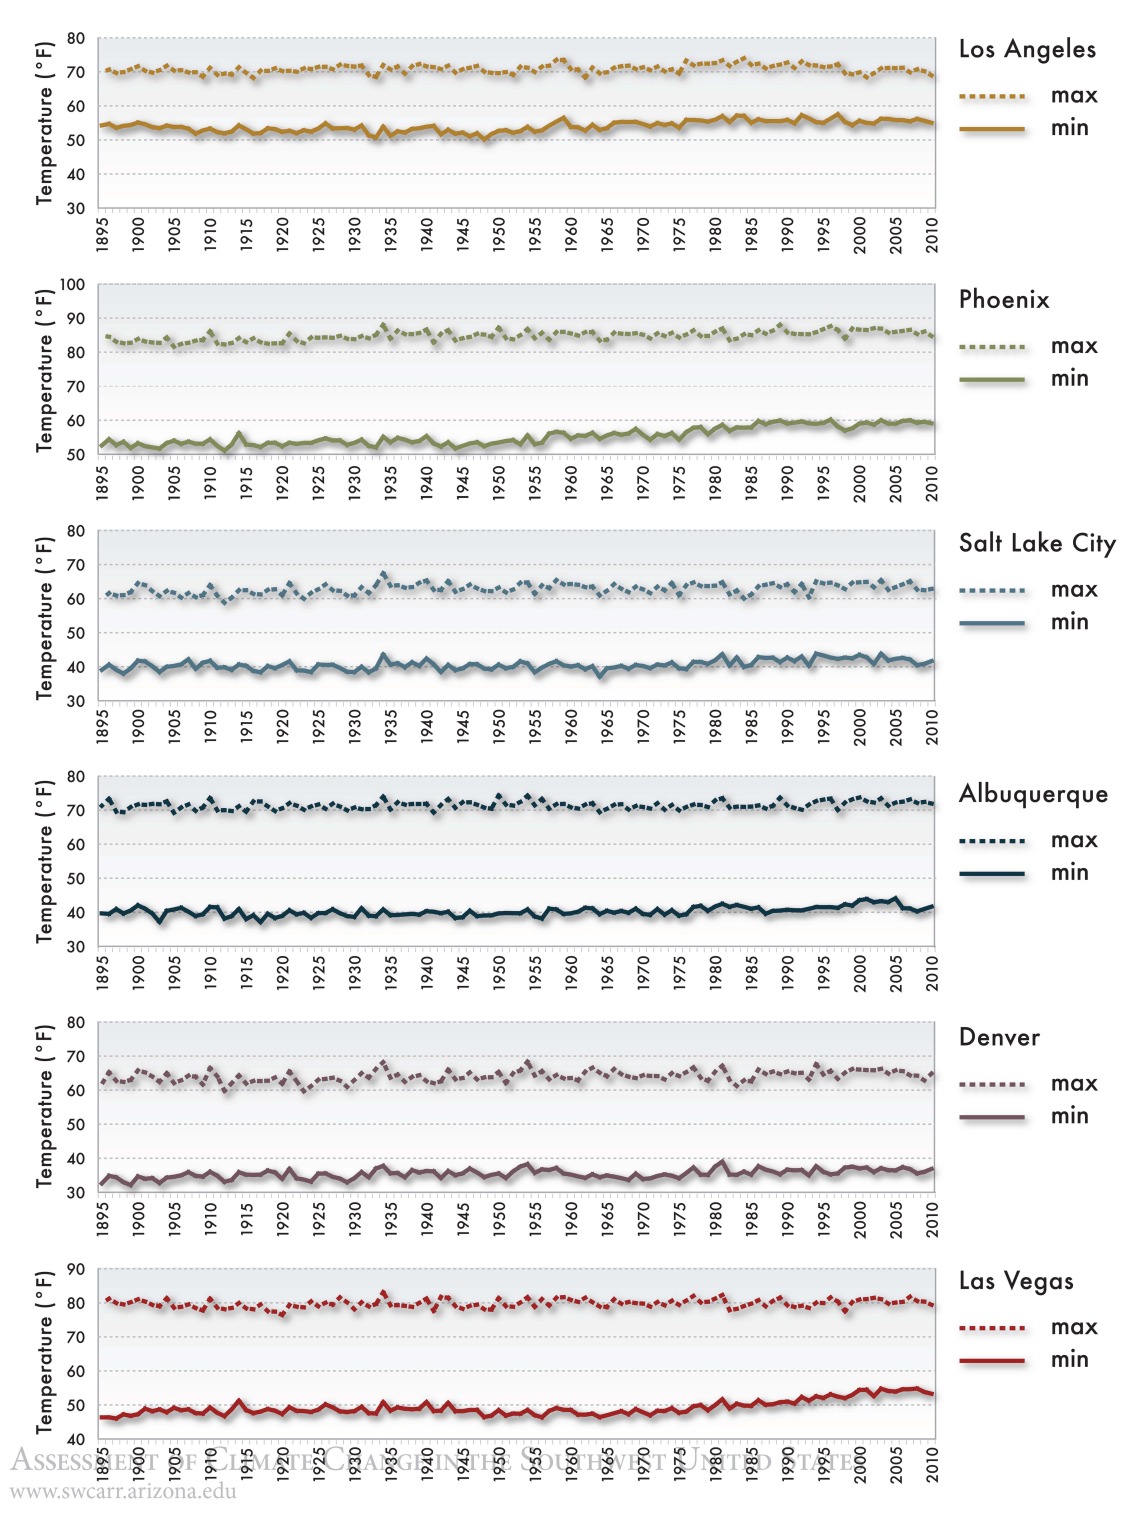 Figure 15 from Chapter 13 of Climate Assessment Report.